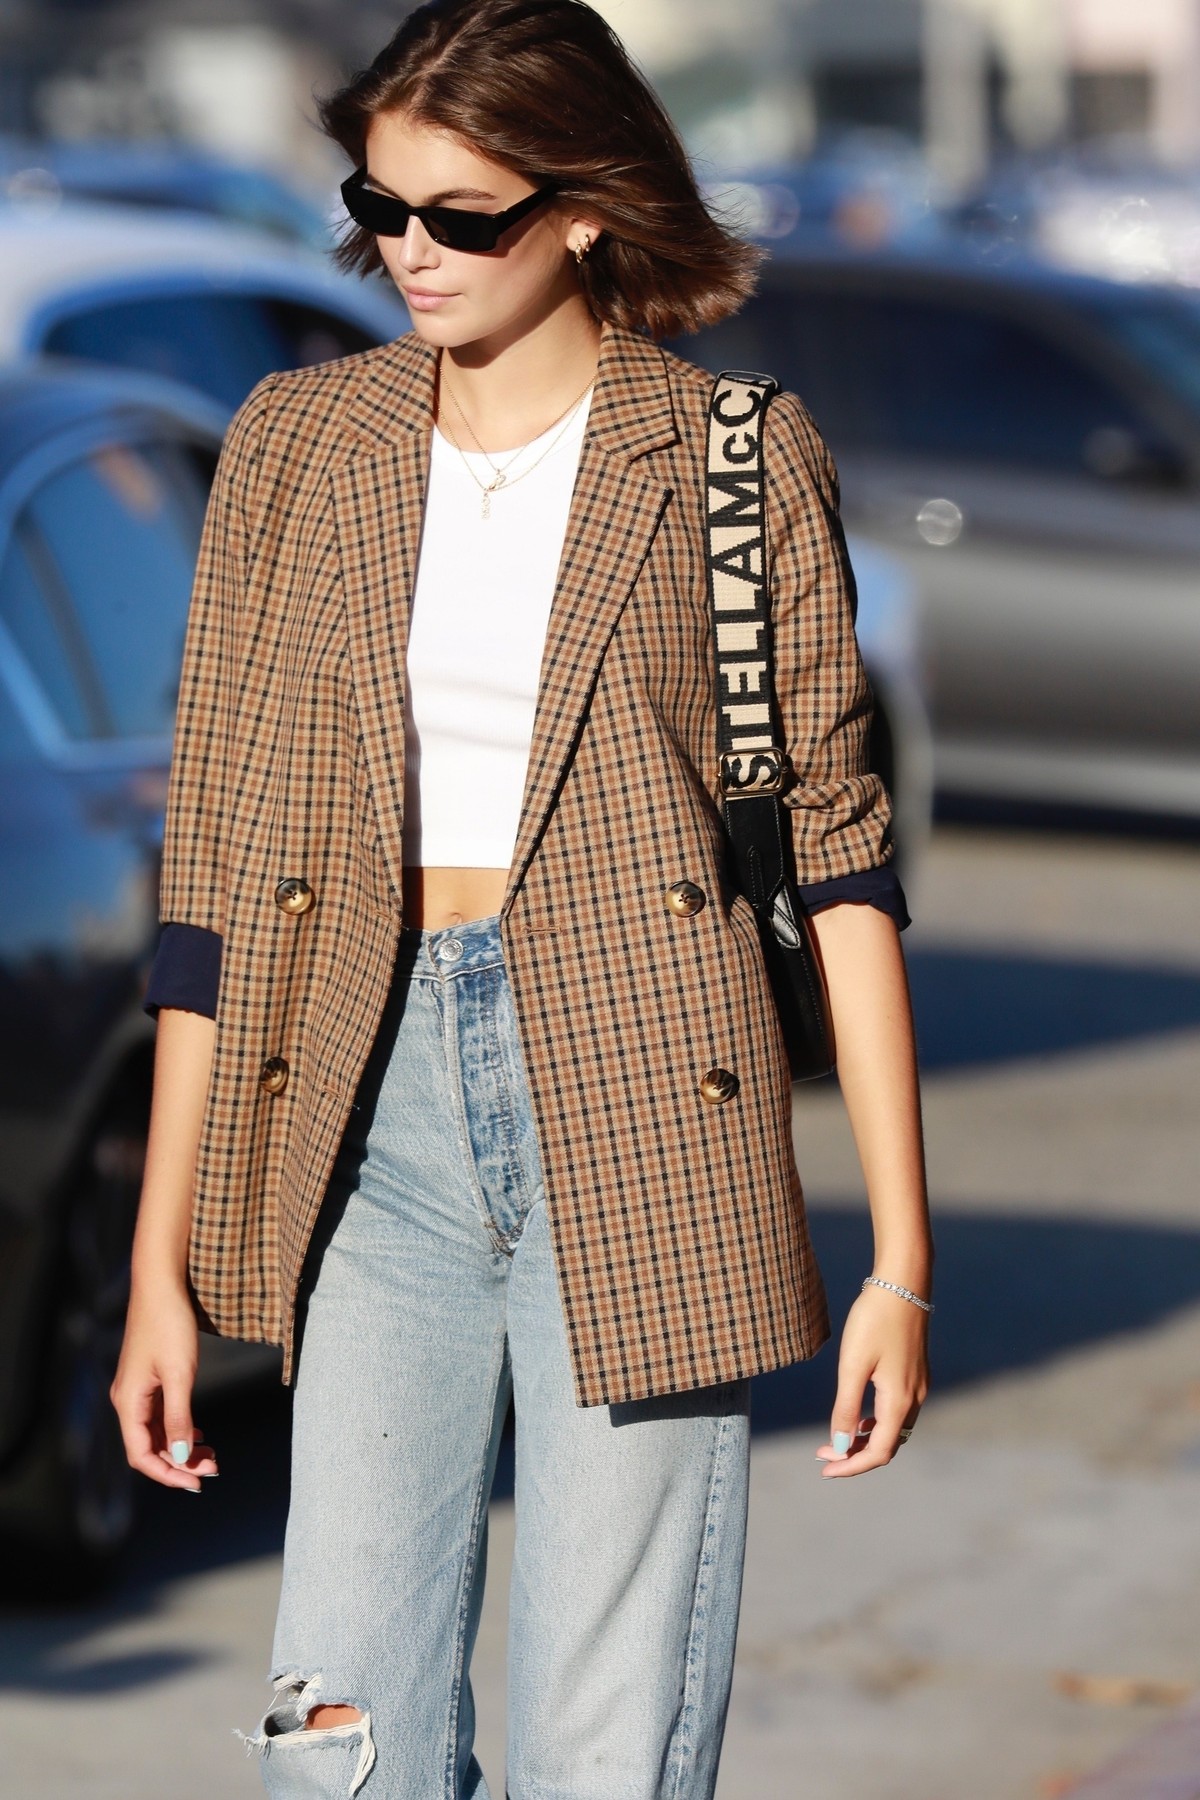 Malibu, CA  - *EXCLUSIVE*  - Kaia Gerber spotted leaving Nobu after a late lunch. The model looks casual but stylish in jeans, a white top and a plaid blazer paired with black high top converse sneakers.

*UK Clients - Pictures Containing Children
Please Pixelate Face Prior To Publication*,Image: 467256166, License: Rights-managed, Restrictions: , Model Release: no, Credit line: BACKGRID / Backgrid USA / Profimedia